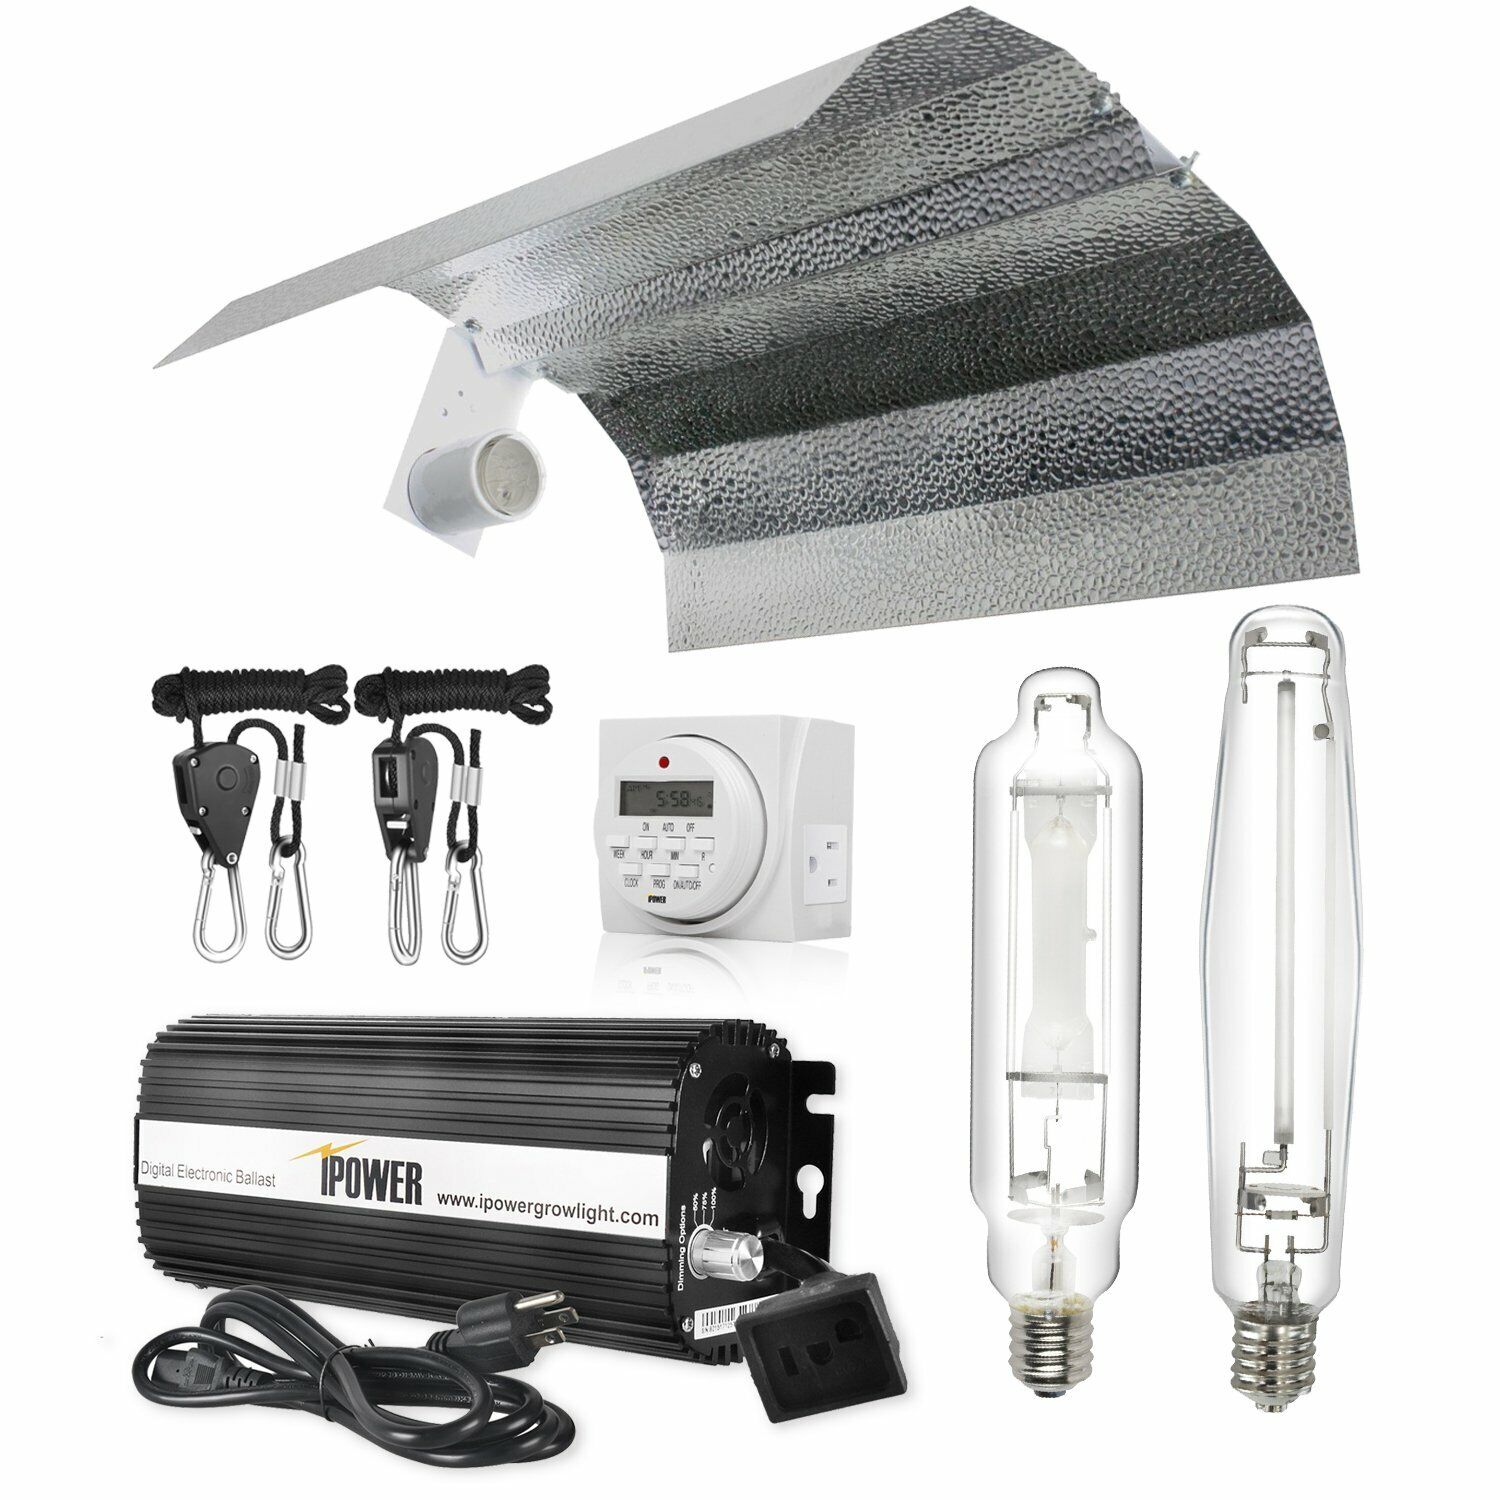 iPower 400/600/1000W HPS MH Grow Light System Kit Wing Cool Tube Hood Reflector